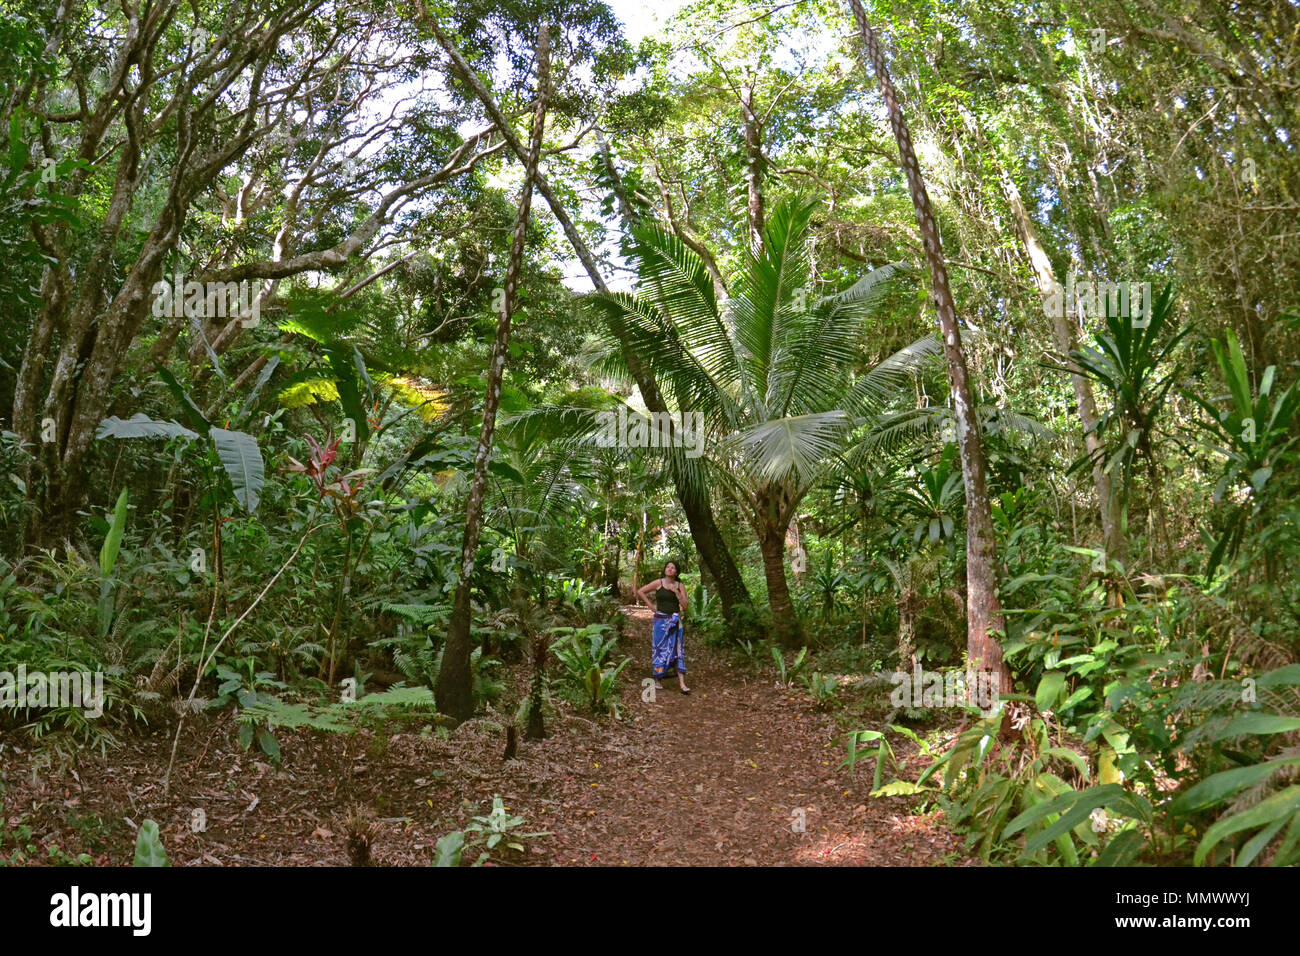 Lady observes the tropical forest in the Isle of Pines, New Caledonia, South Pacific Stock Photo